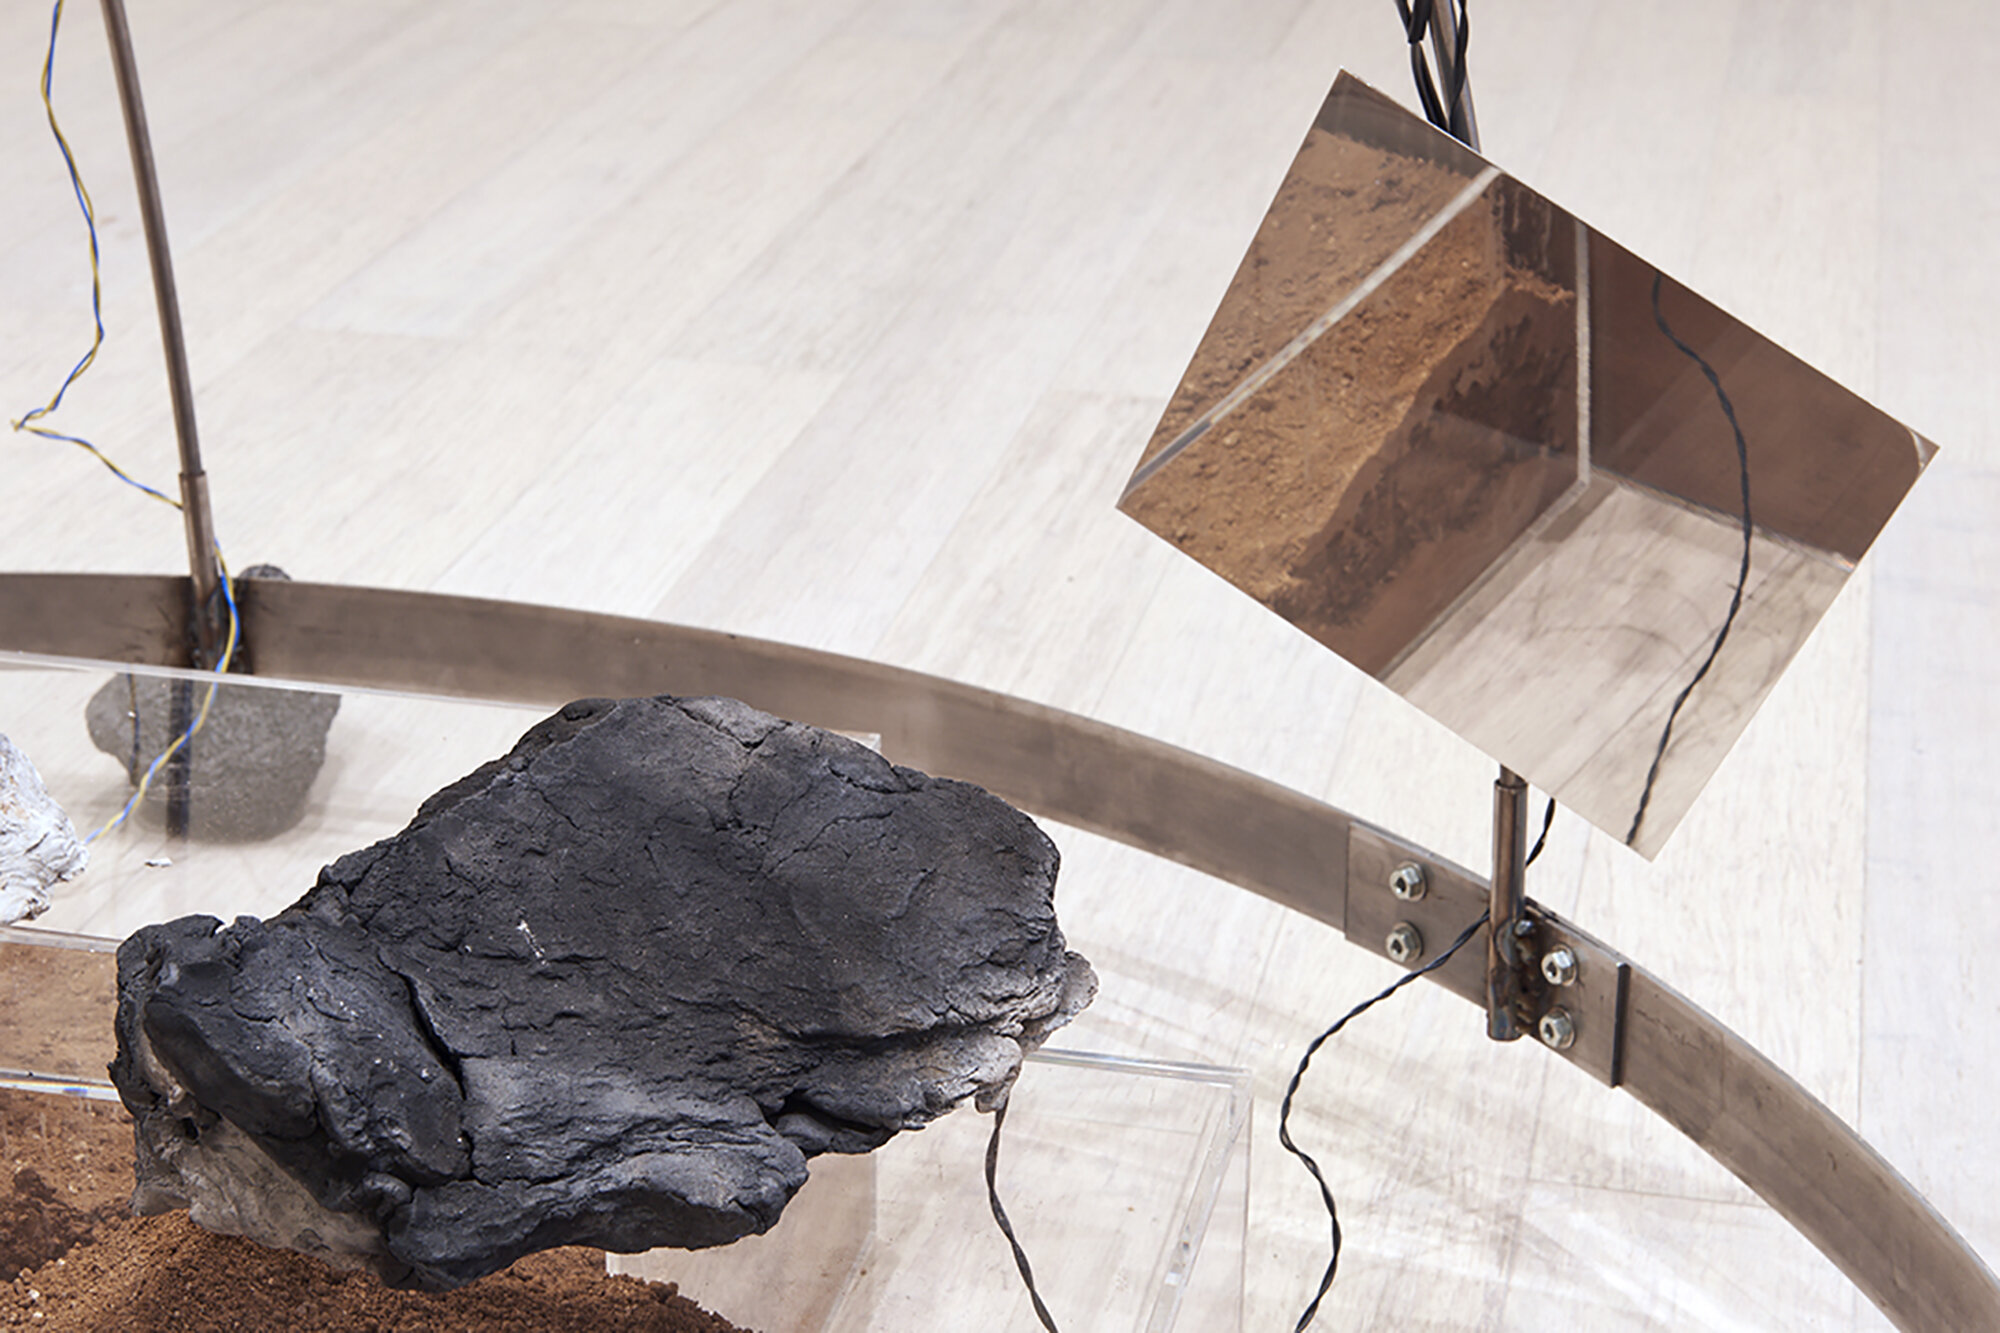  Yixuan Shao and Bicheng Liang  Left Without The Means To Move , (detail) 2021 Lava rocks, anodized aluminum, bone conductors, pit fired wild clay and sound recorded within, desert soil, amplified microphones, speakers, subwoofers, and other mixed me